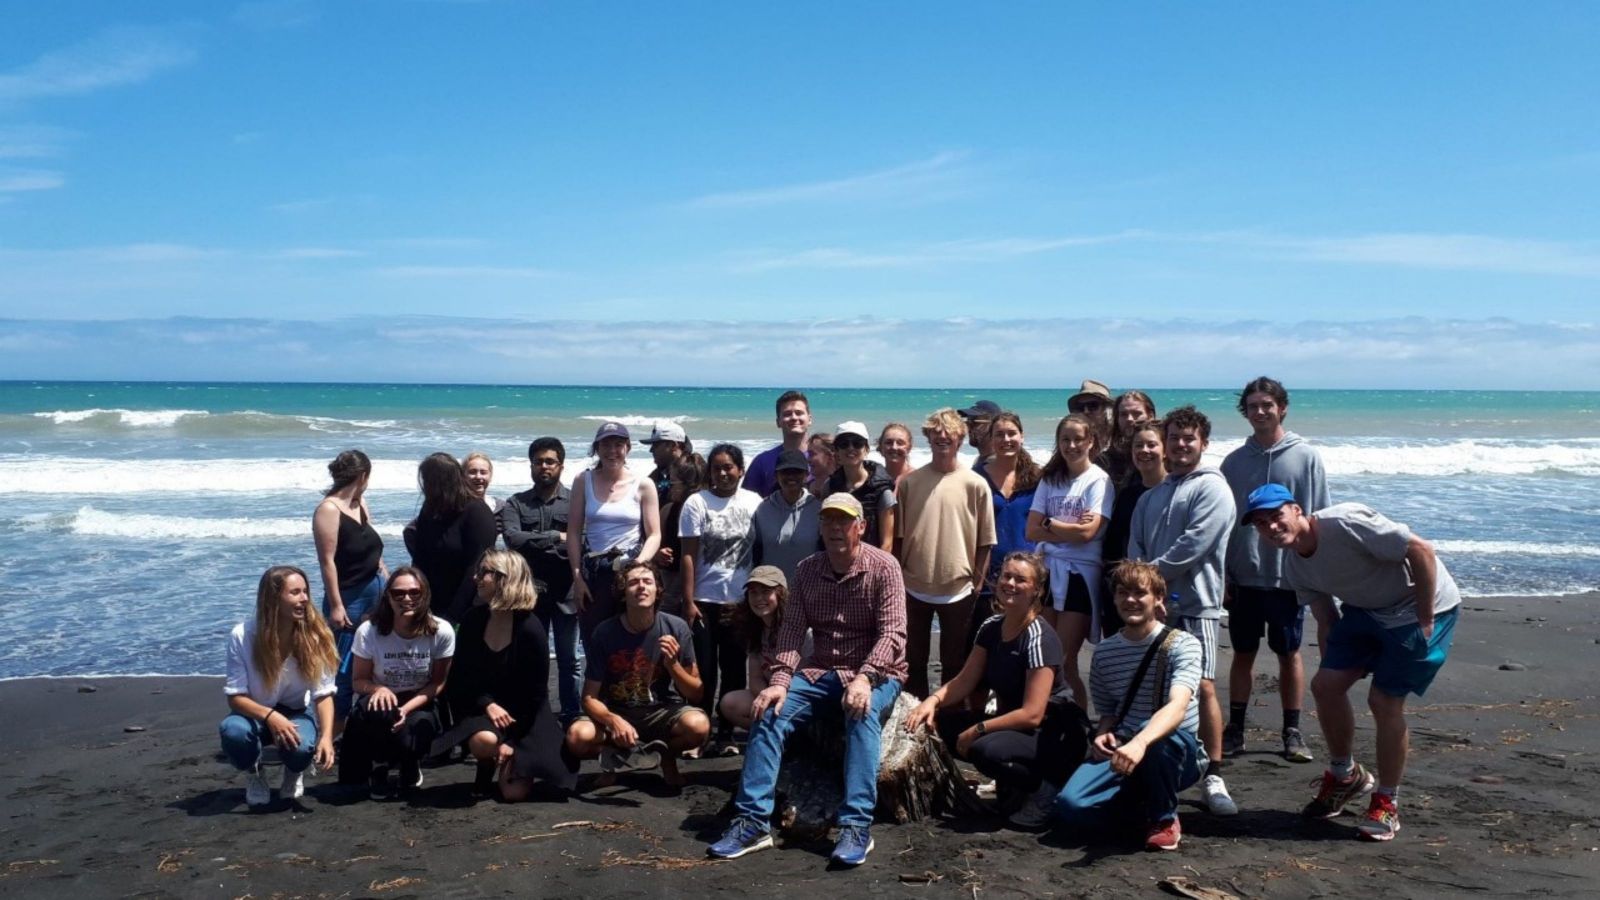 A group of around 30 people on a beach with blue sky and crashing waves behind them